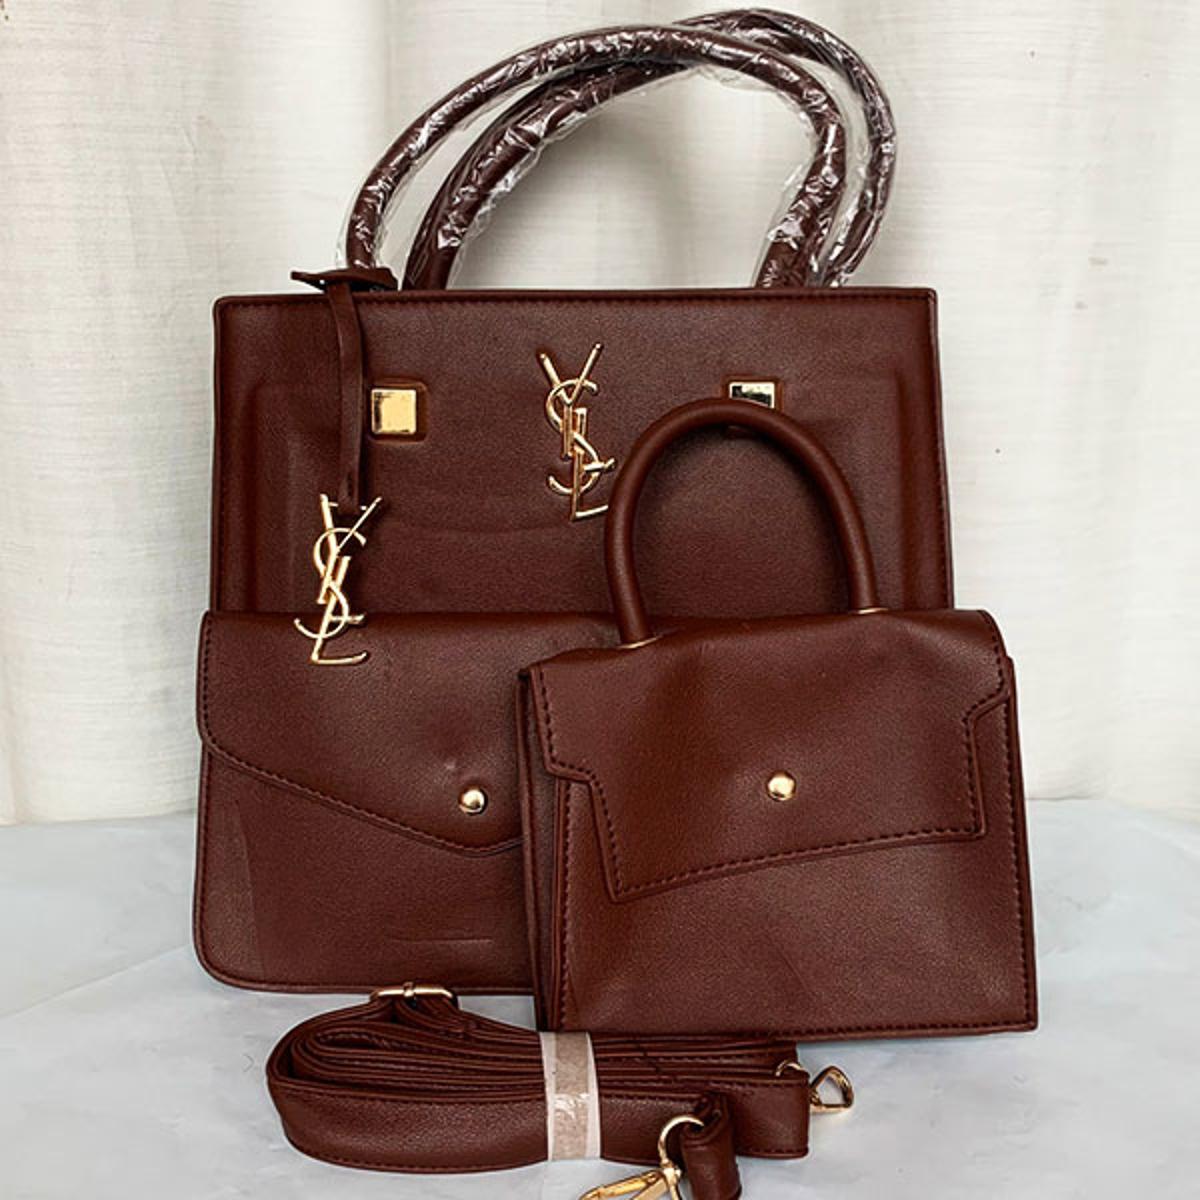 Ysl Bag With Keychain Best Price In Pakistan, Rs 4200